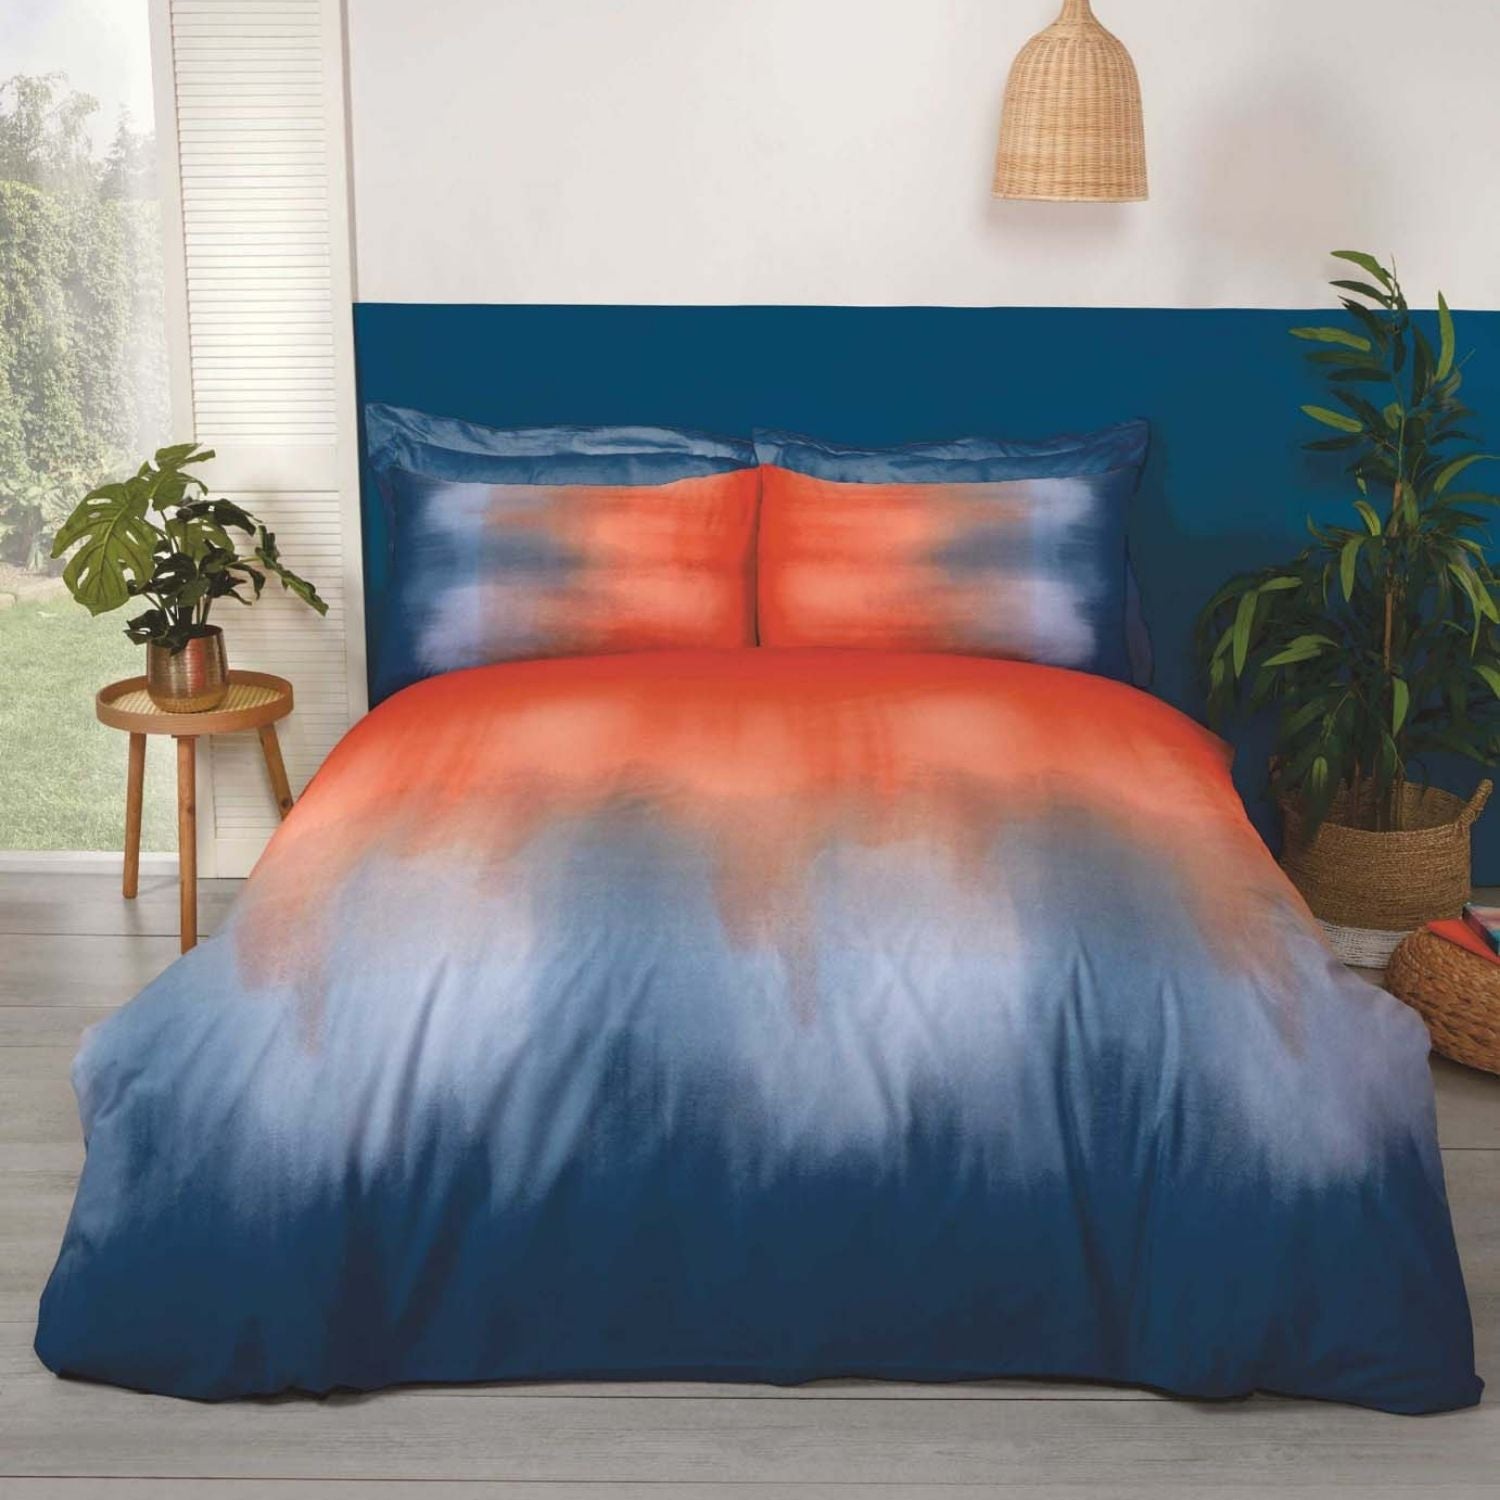  The Home Bedroom Ombre Duvet Cover Set - Spice 1 Shaws Department Stores